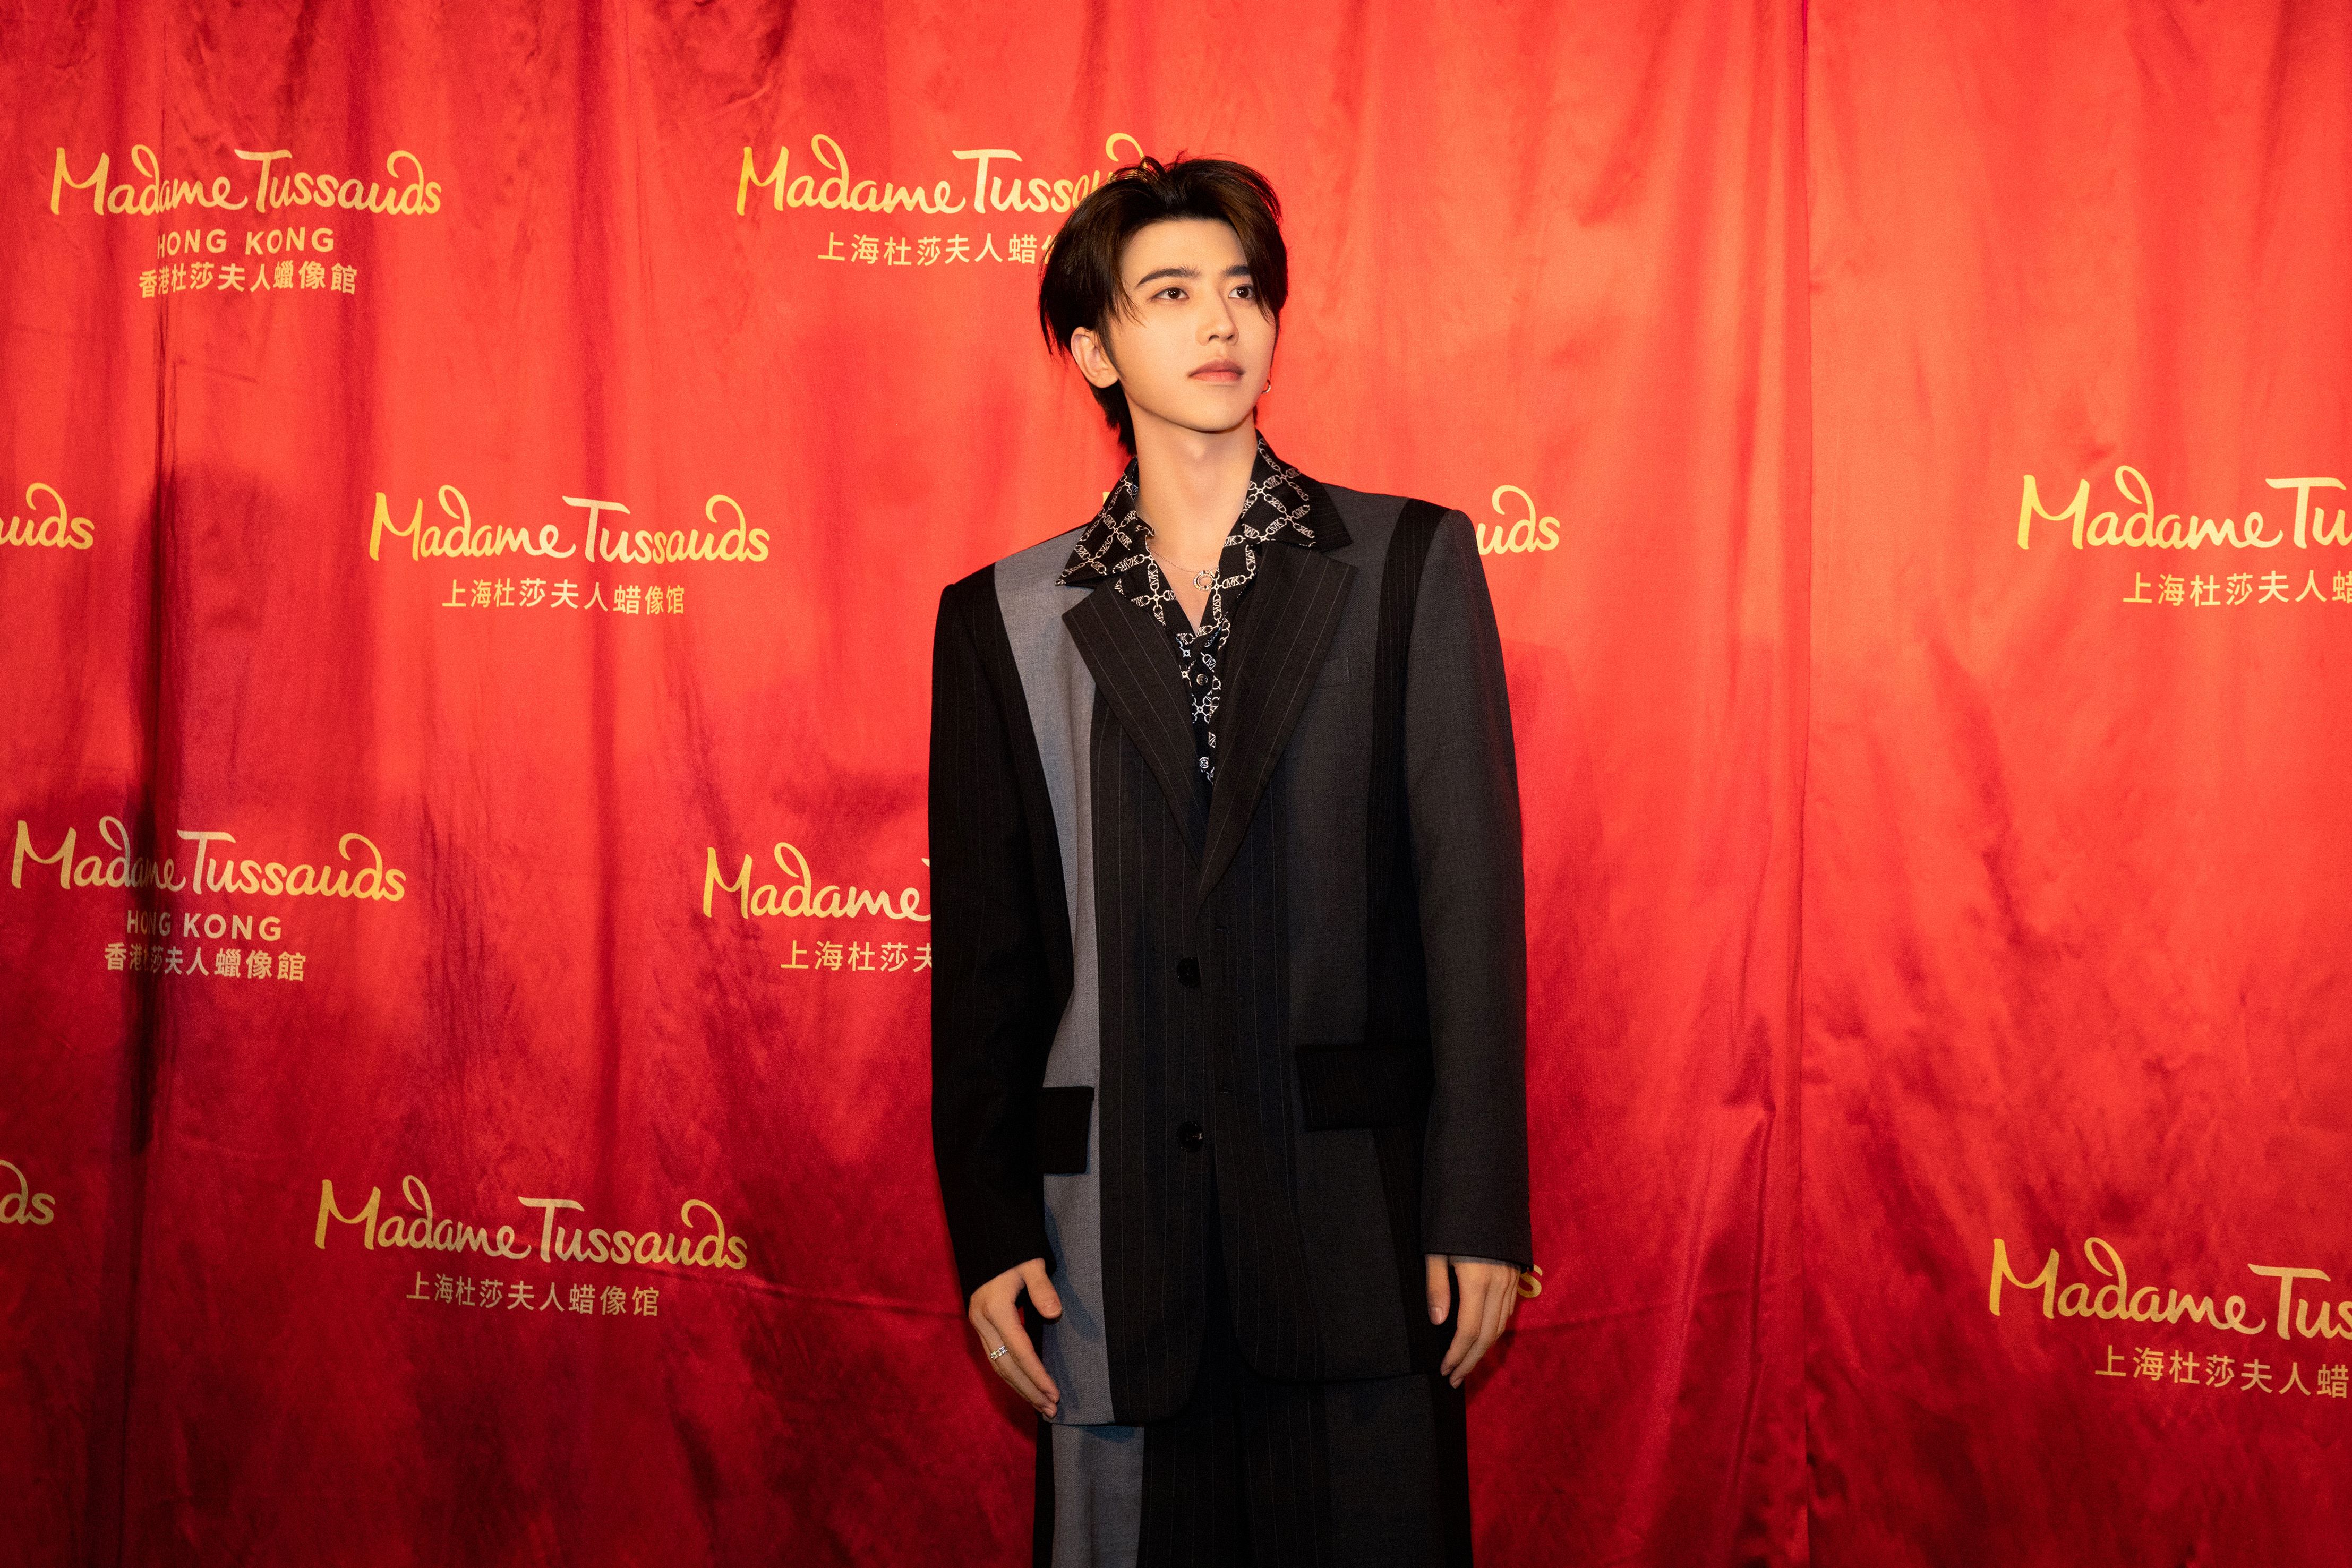 Cai Xu Kun double wax figures side-by-side event at Madame Tussauds Hong Kong